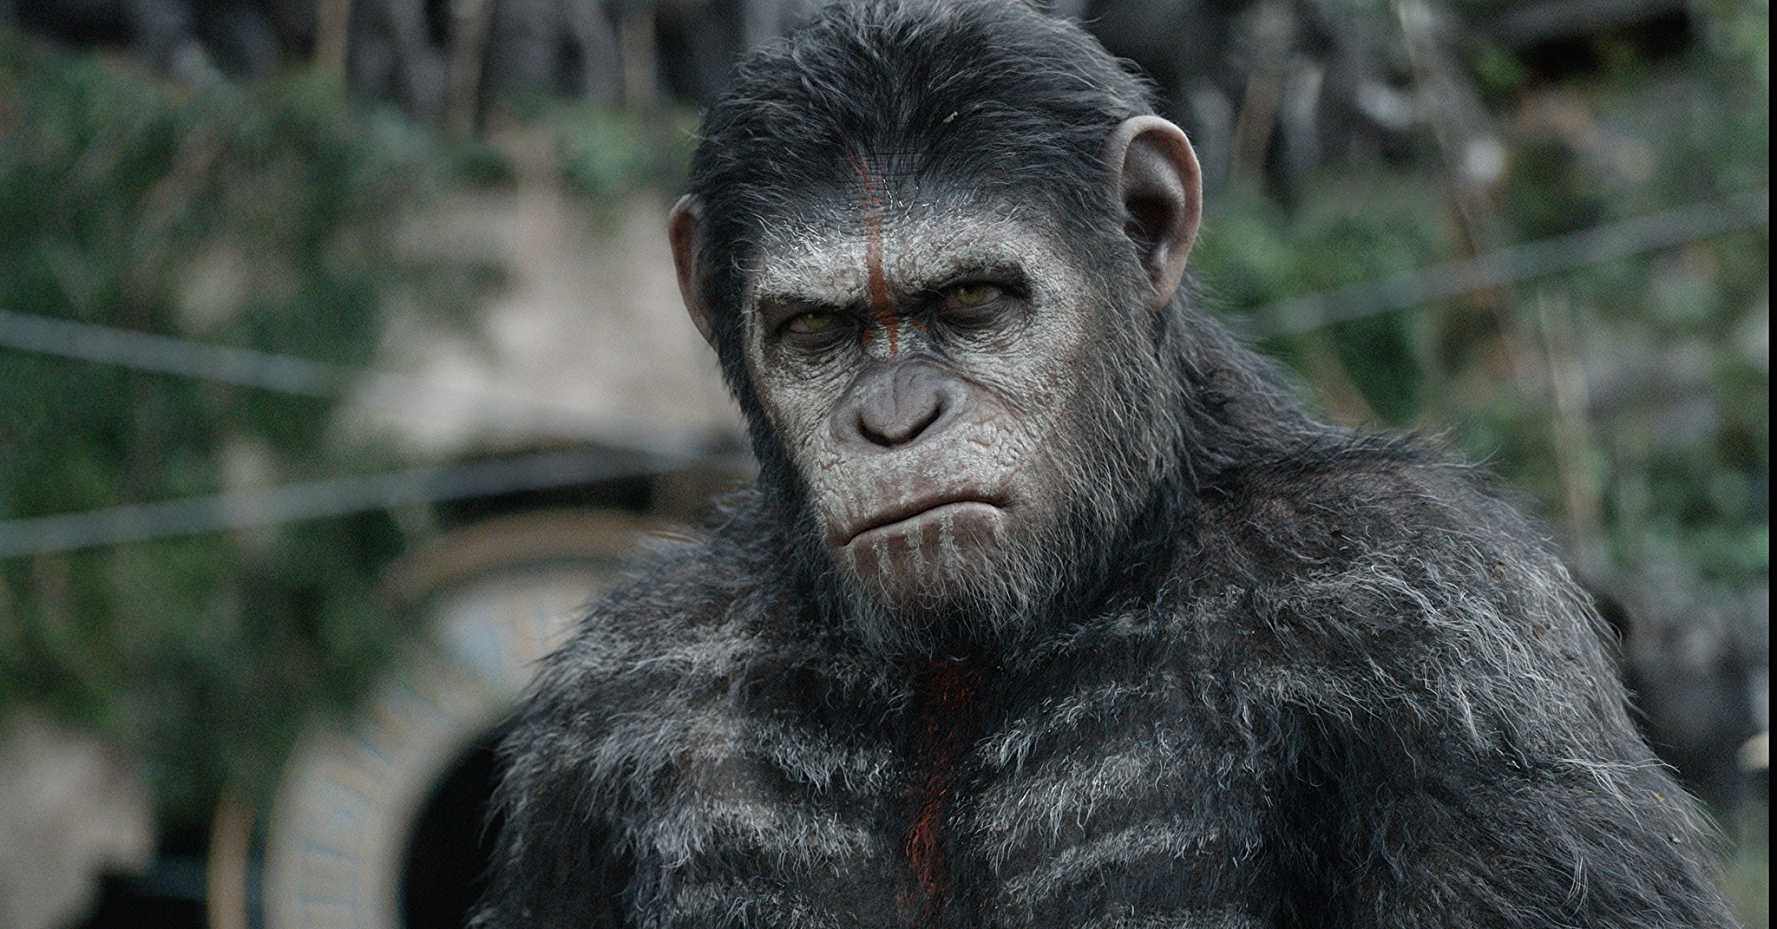 dawn of the planet of the apes full movie in hindi free download utorrent